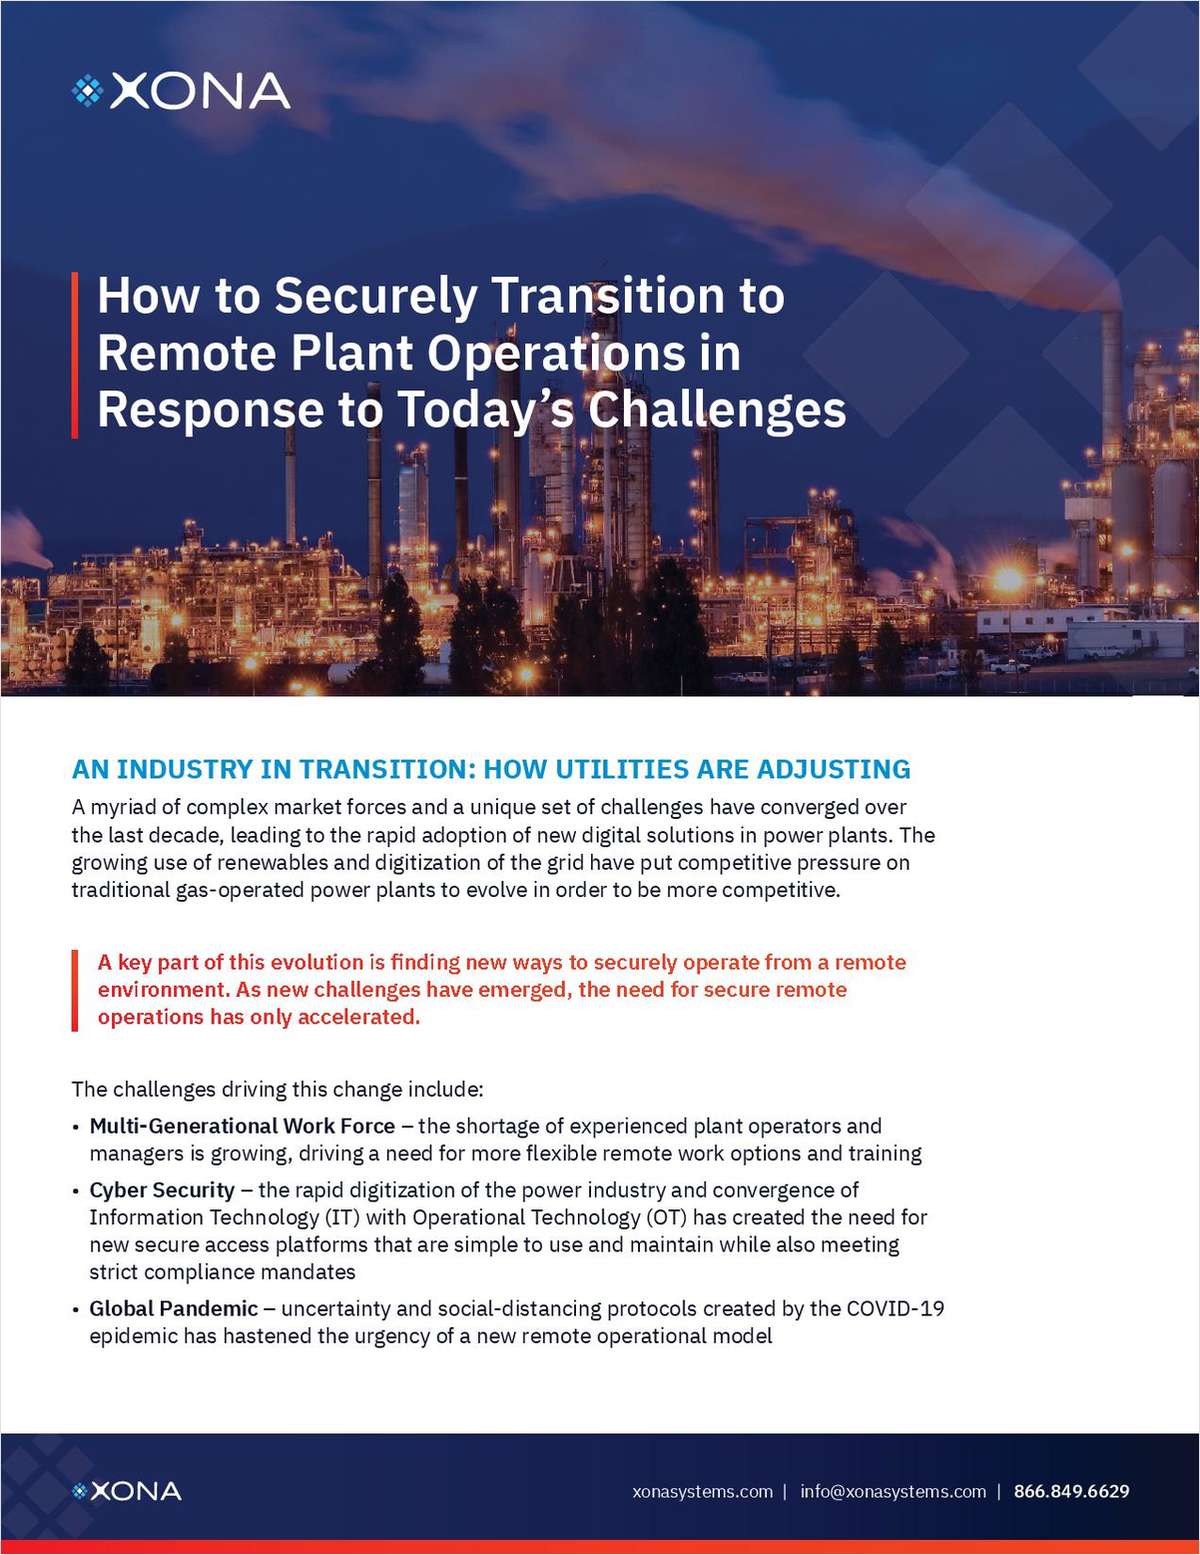 How to Securely Transition to Remote Plant Operations in Response to Today's OT Challenges